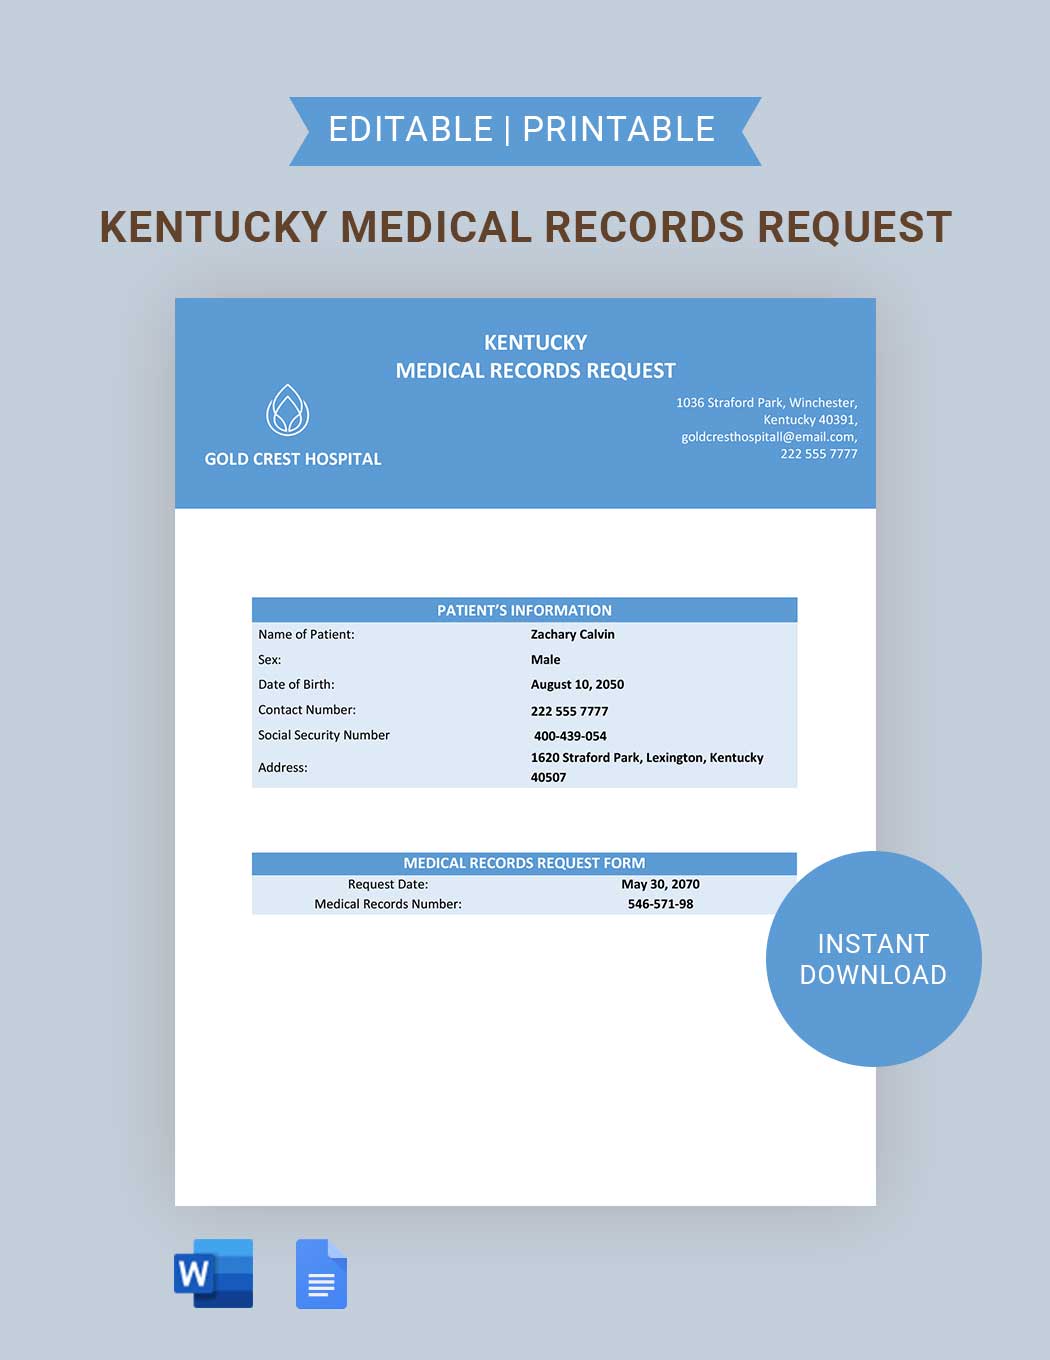 Kentucky Medical Records Request Template in Word, Google Docs